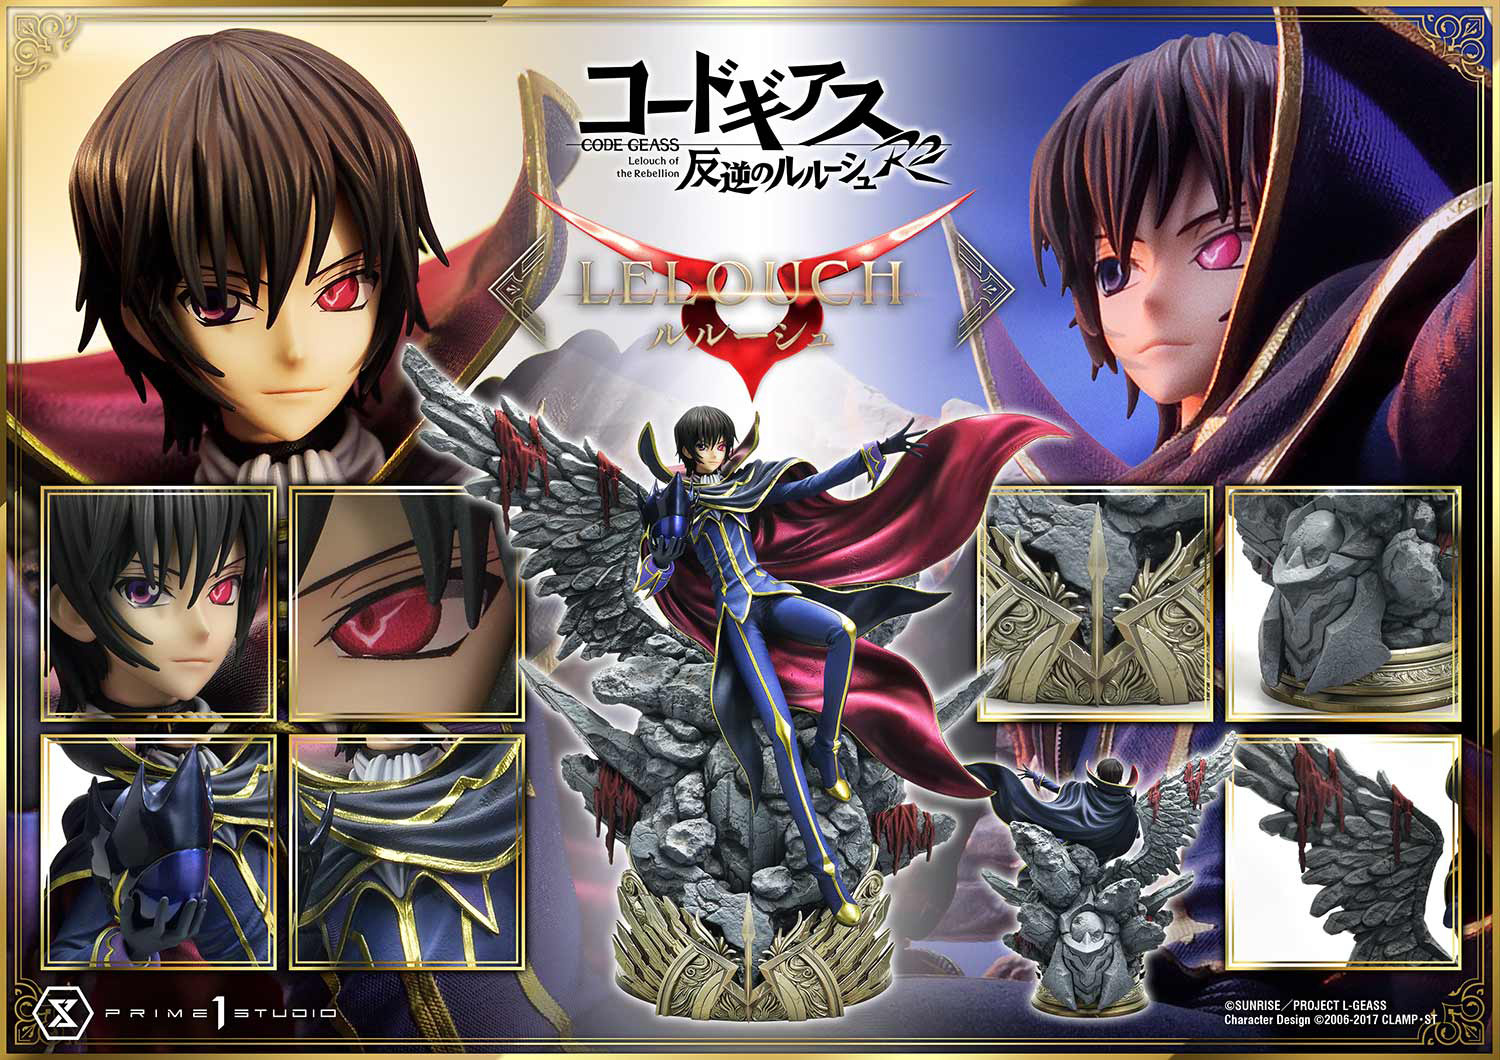 Code Geass: Lelouch of the Rebellion R2 (Anime) –